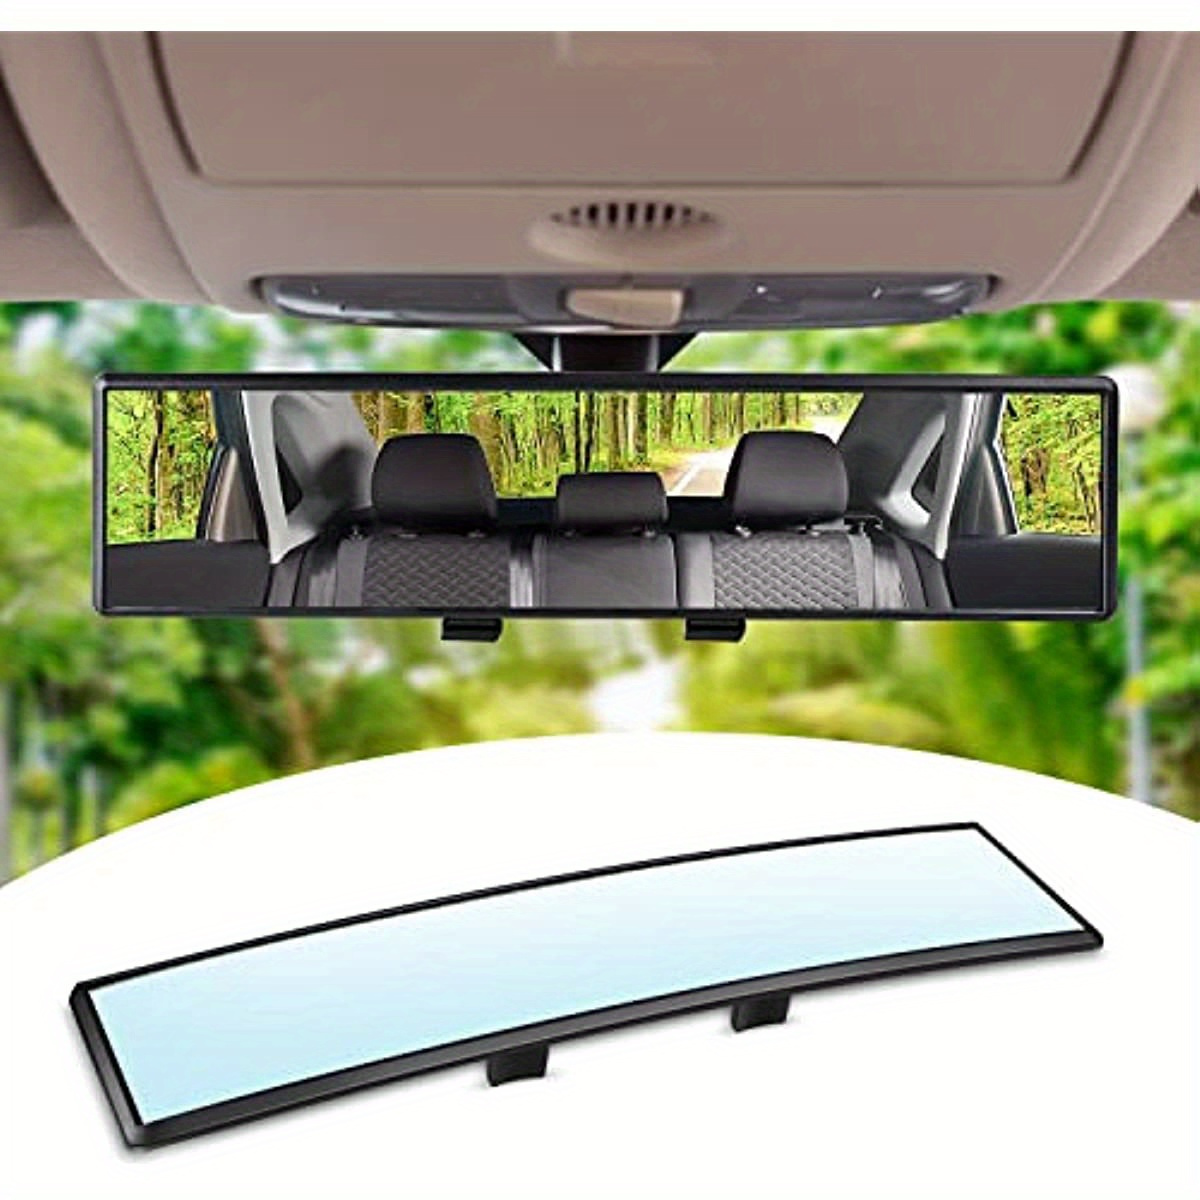 

Hd Wide-angle Rearview Mirror For Cars - Anti-glare, Easy Install, Fit, Choose From 9.4", 10.6", Or 11.8" Sizes